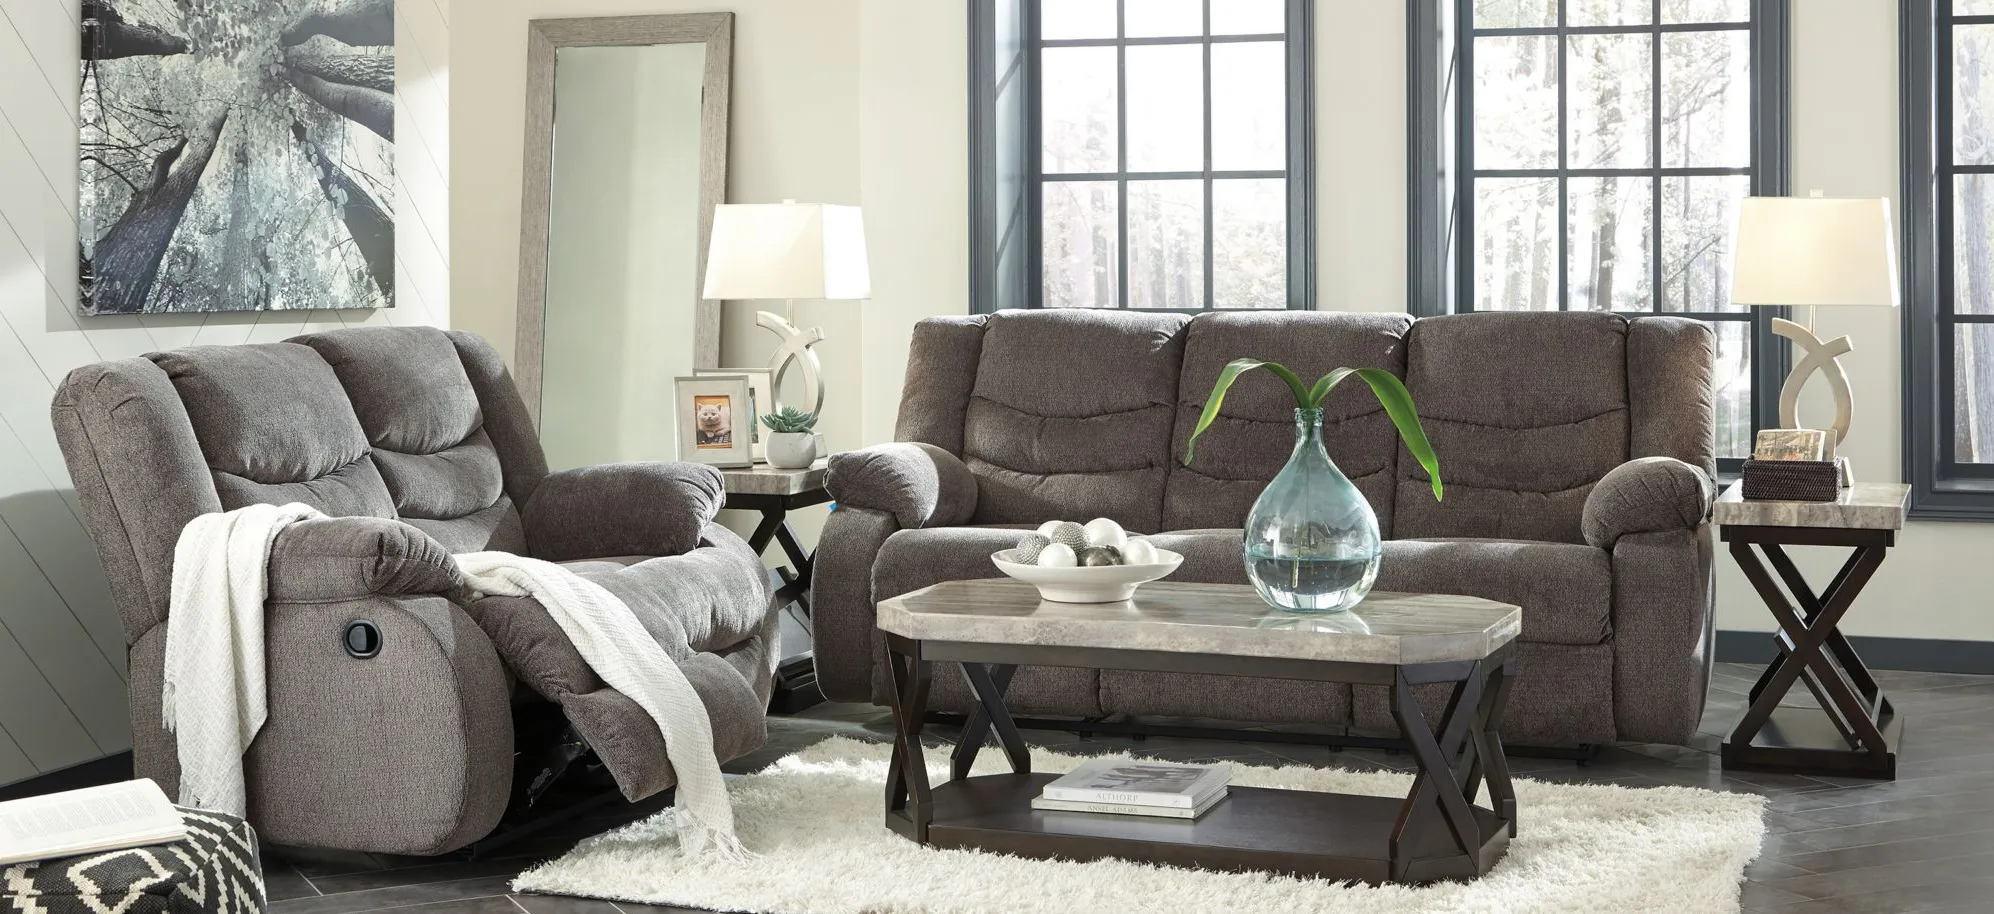 Southgate 2-pc. Reclining Sofa and Loveseat Set in Gray by Ashley Furniture